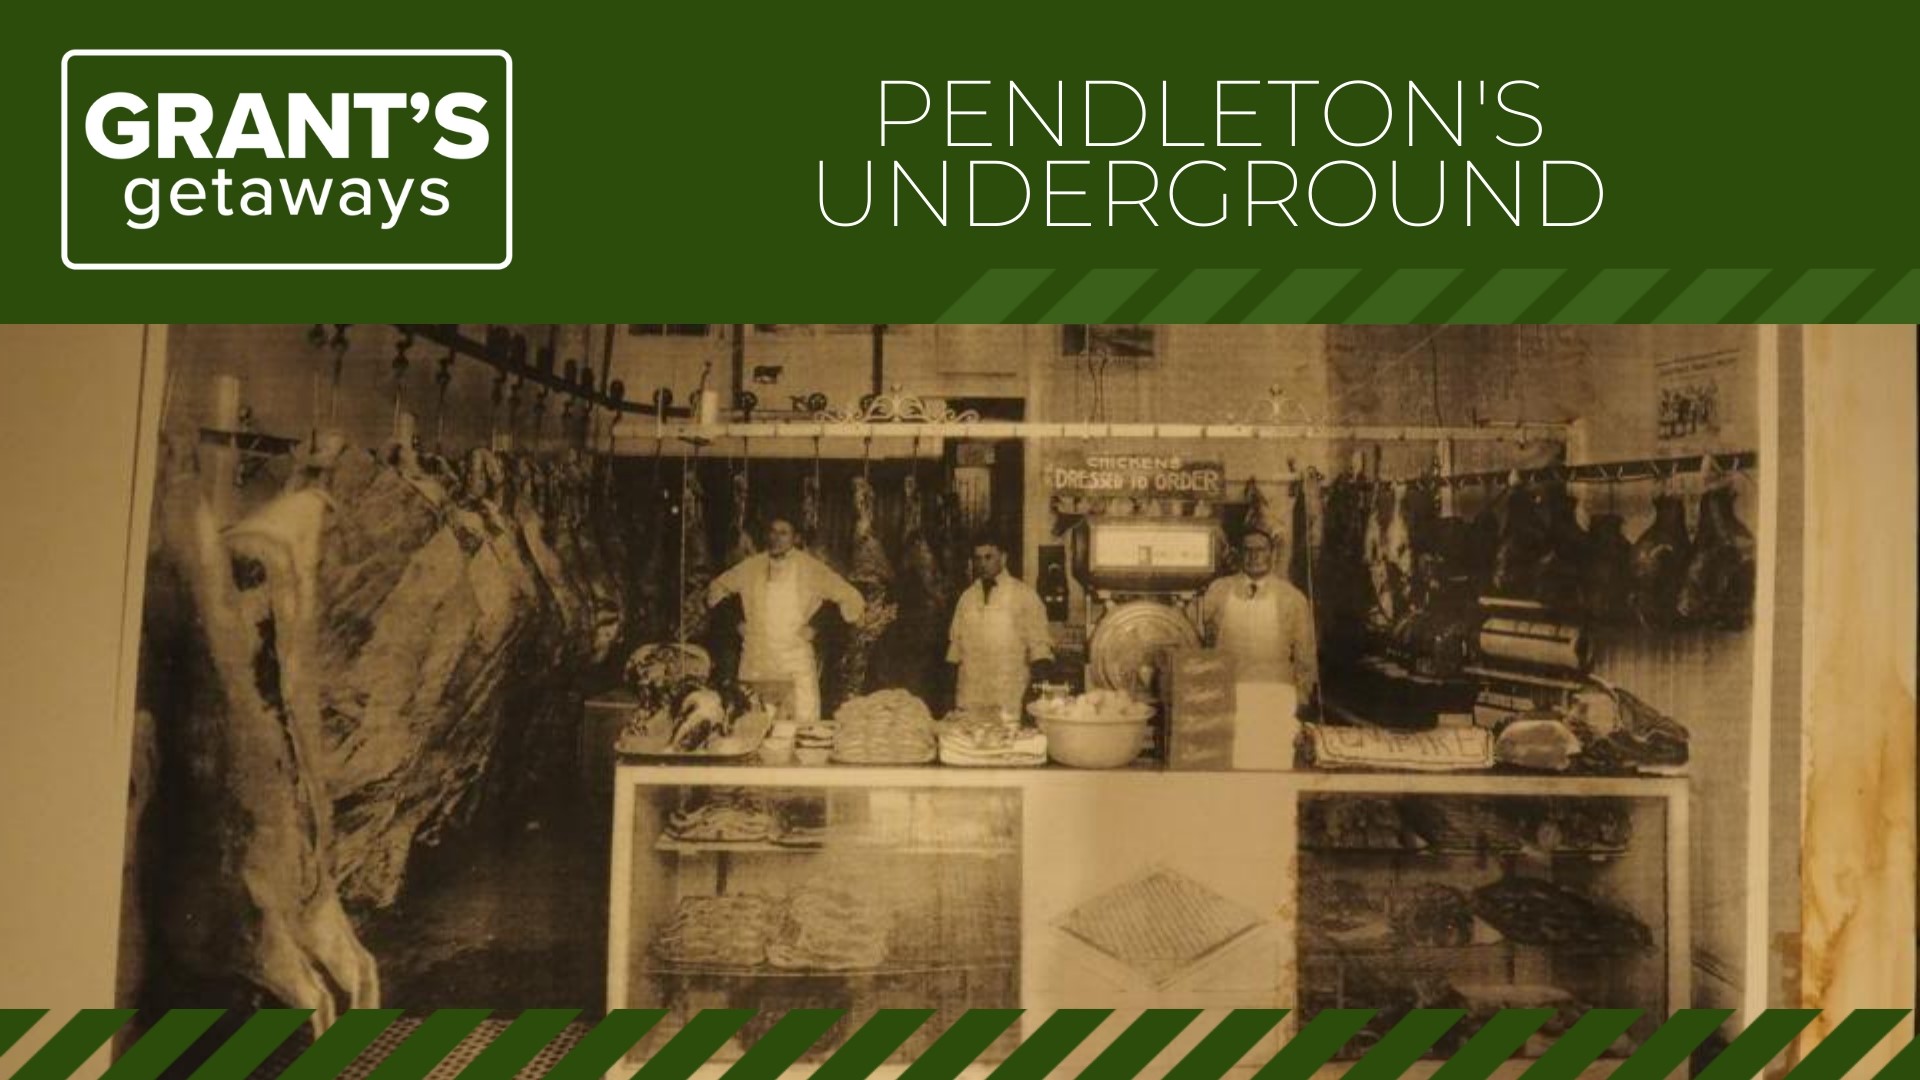 Eastern Oregon heritage is kept alive and legends live on in Pendleton, Oregon's historic underground. It was once the site of the city's seedier side.